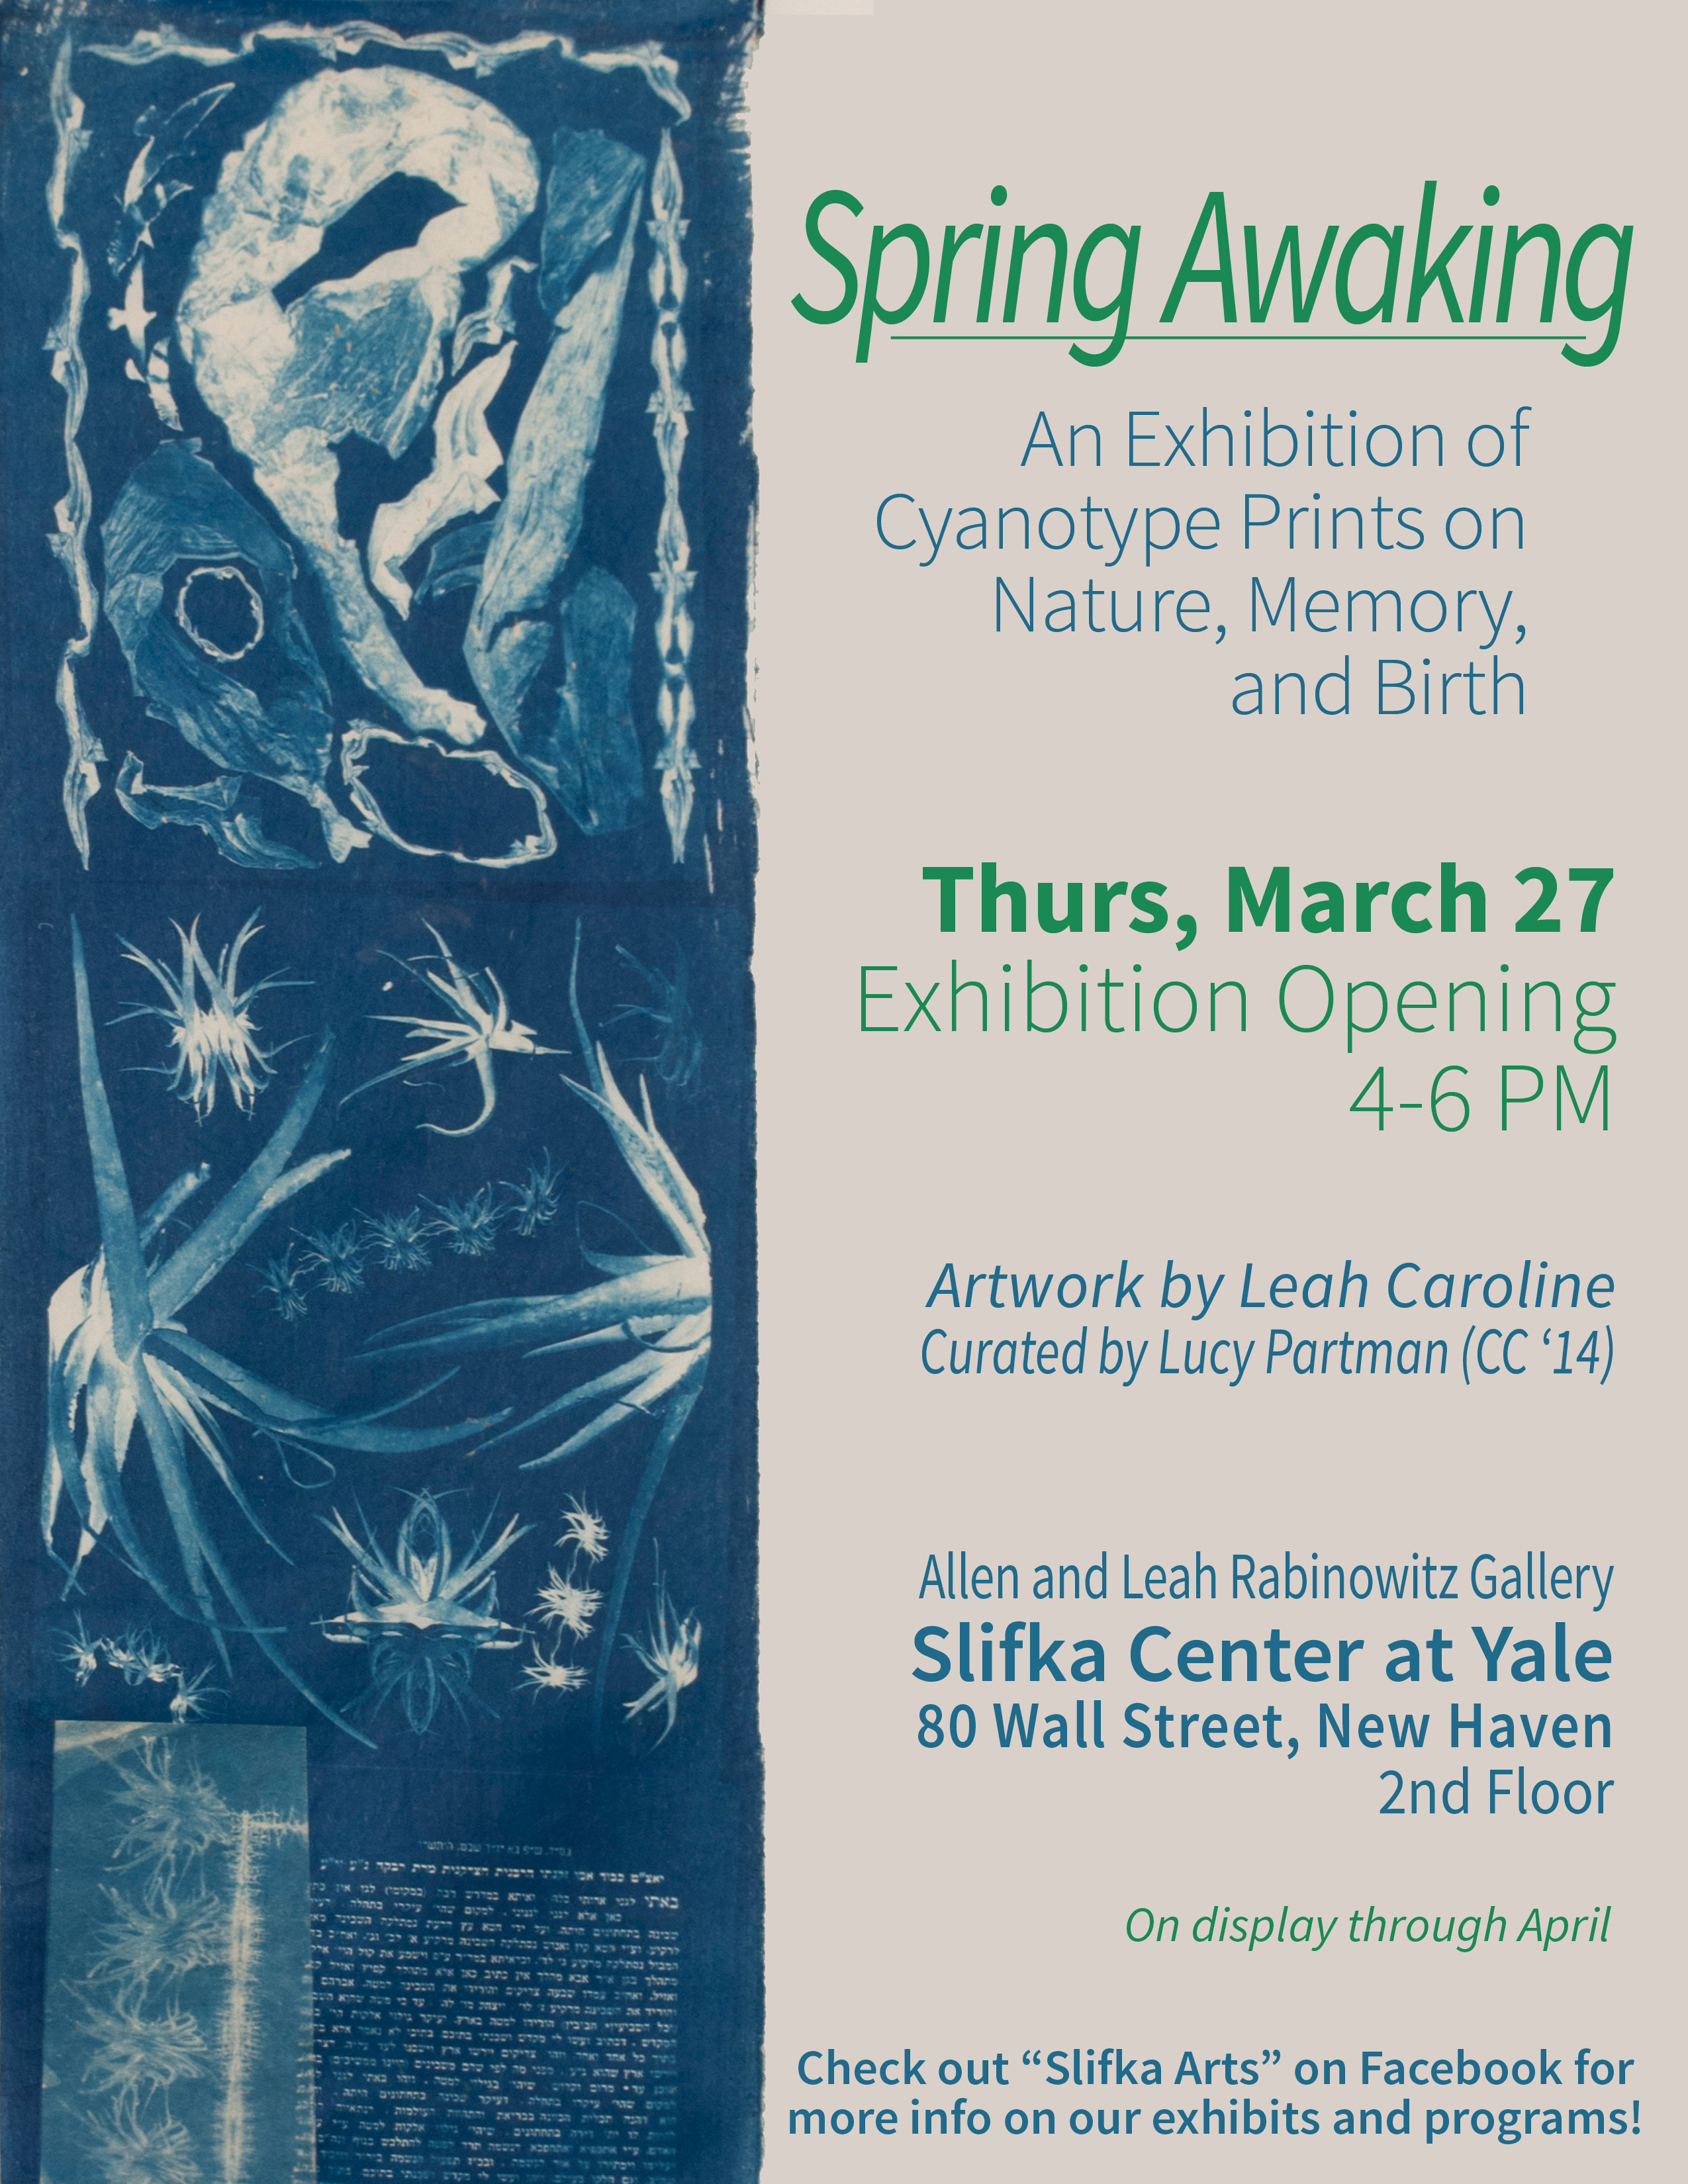 Spring Awaking, an exhibition of contemporary cyanotype photographs on view at Slifka Center through April.